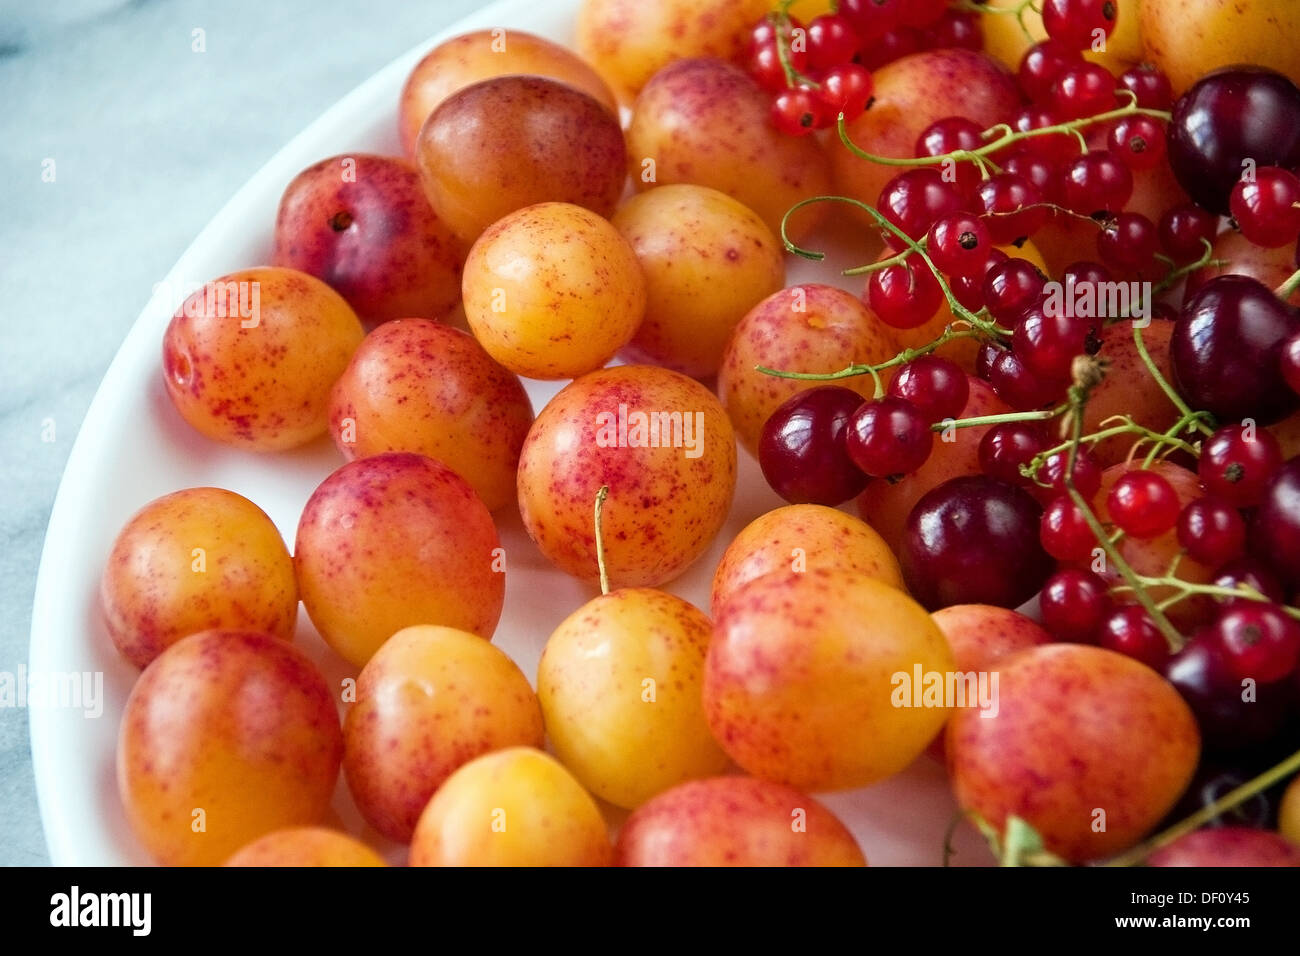 Berlin, Germany, plates with plums, cherries and currants Stock Photo